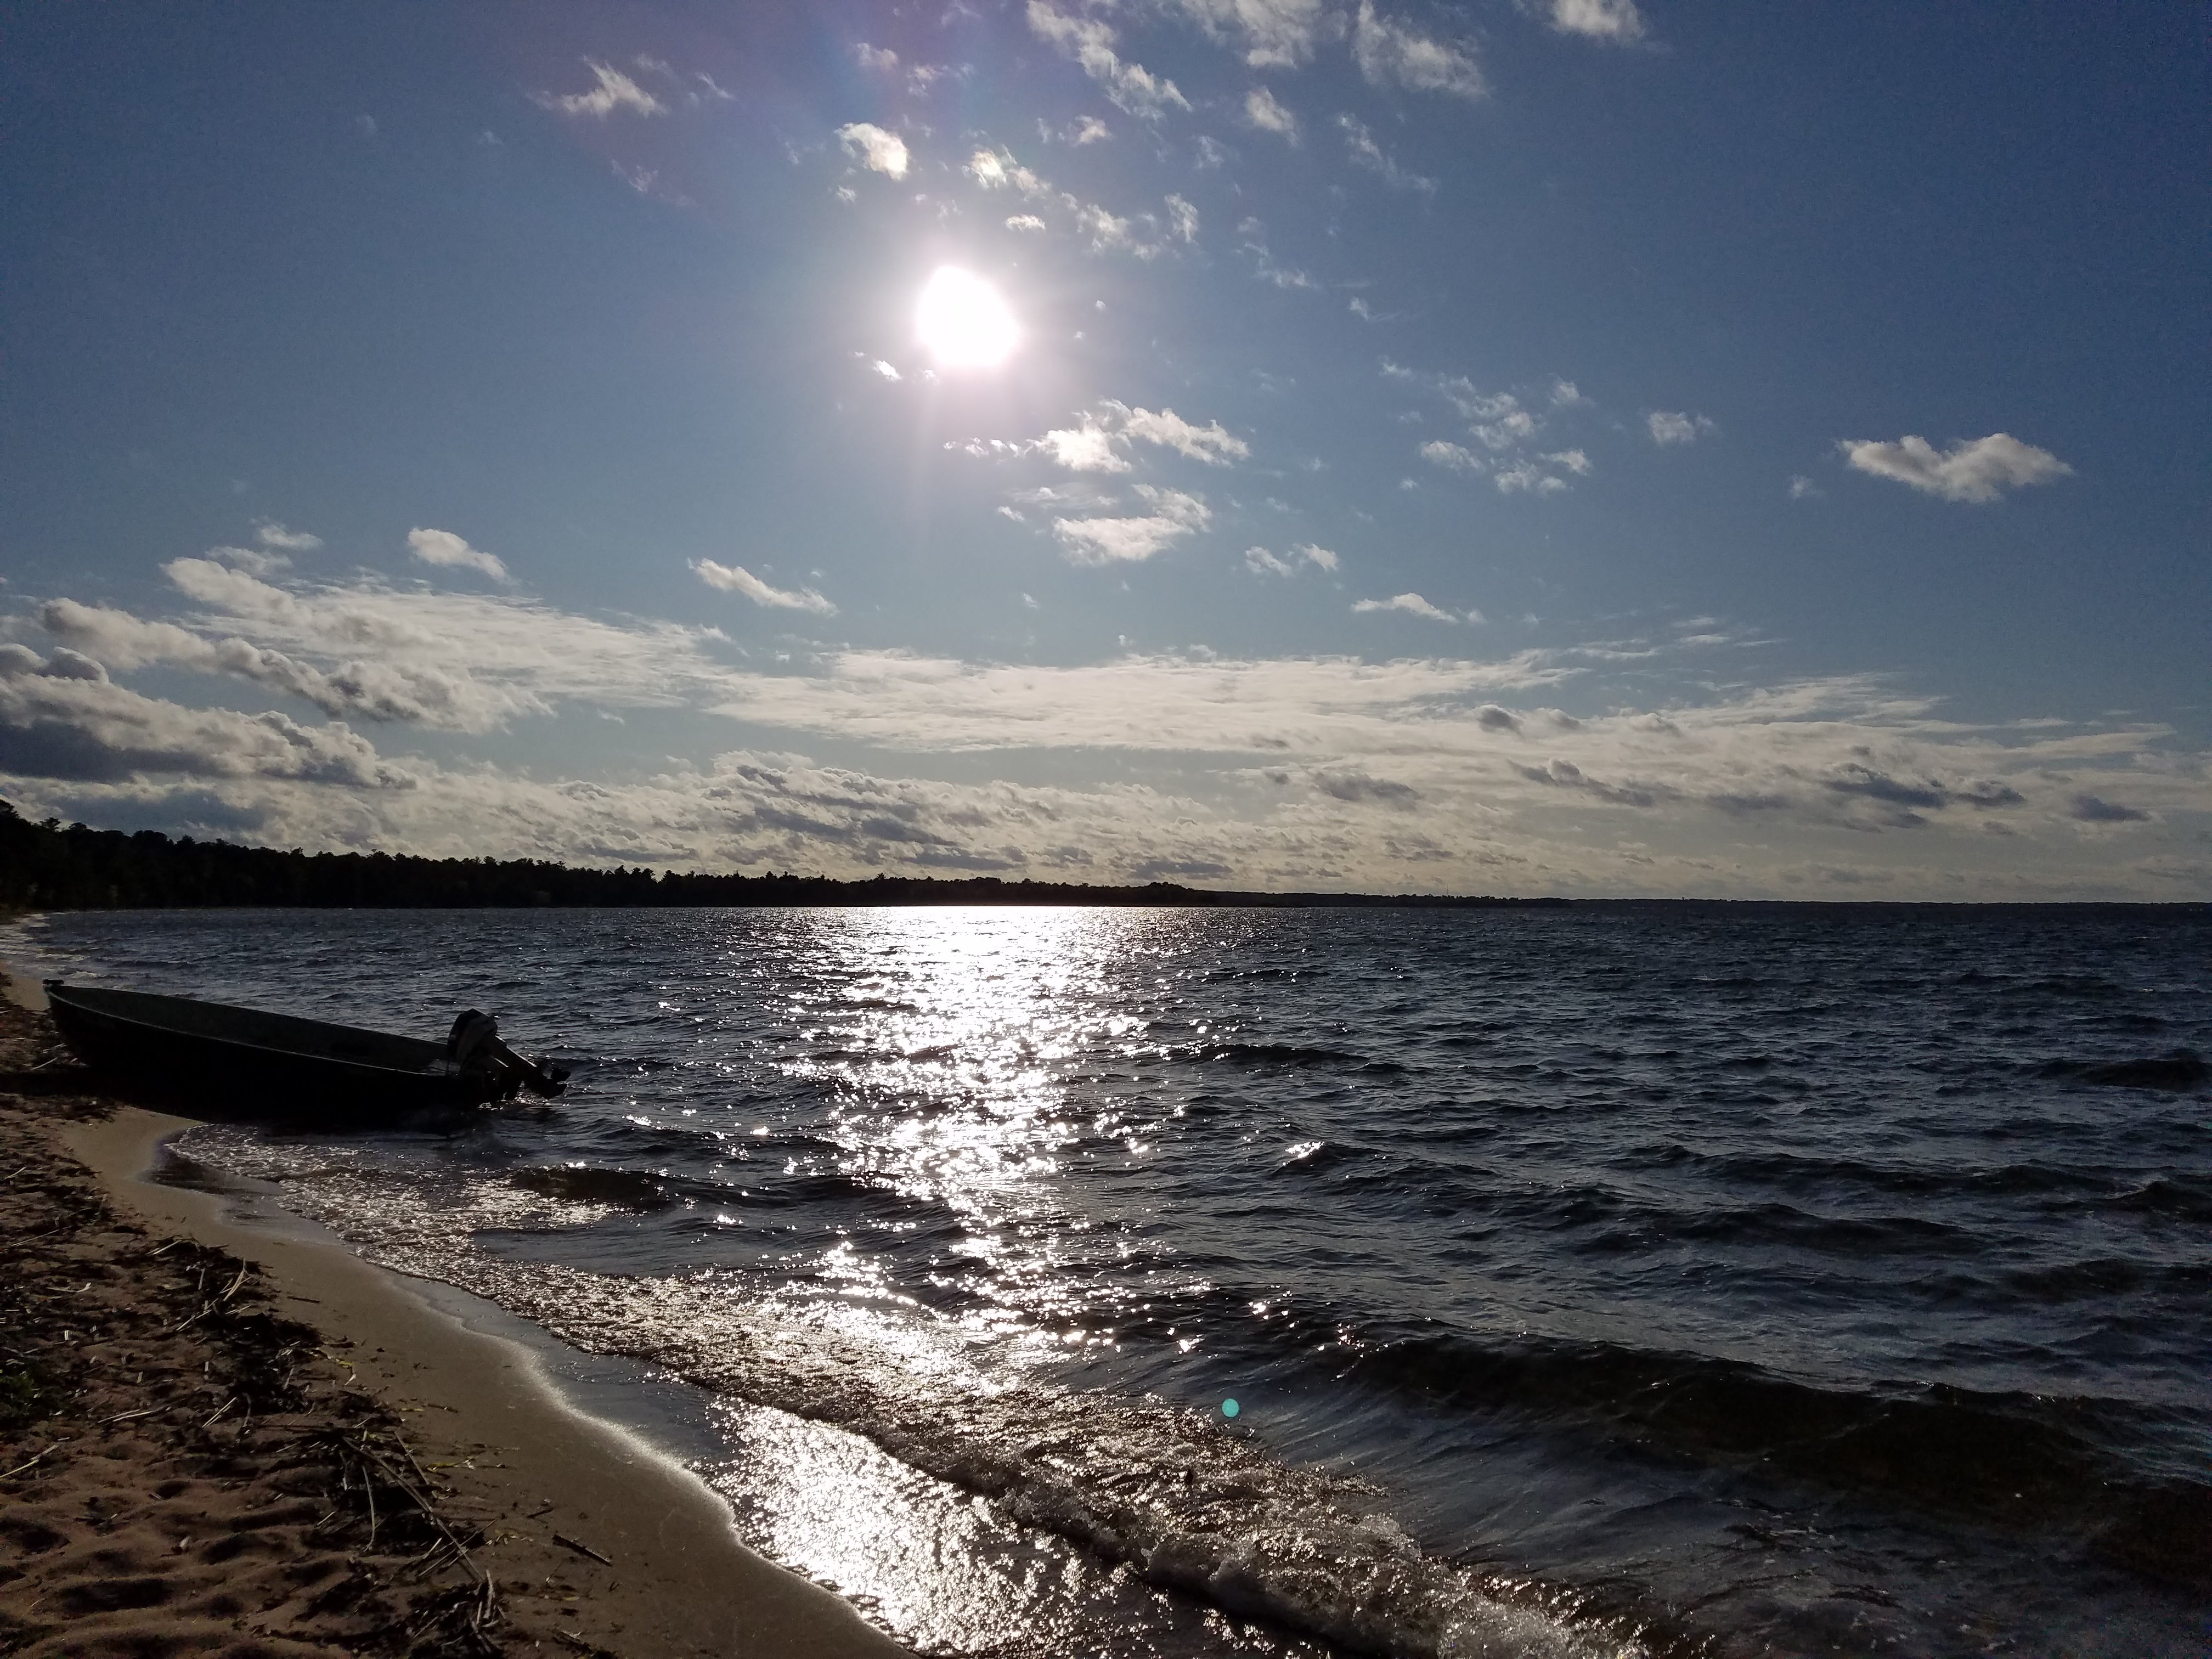 Norway Beach on Cass Lake is gorgeous!